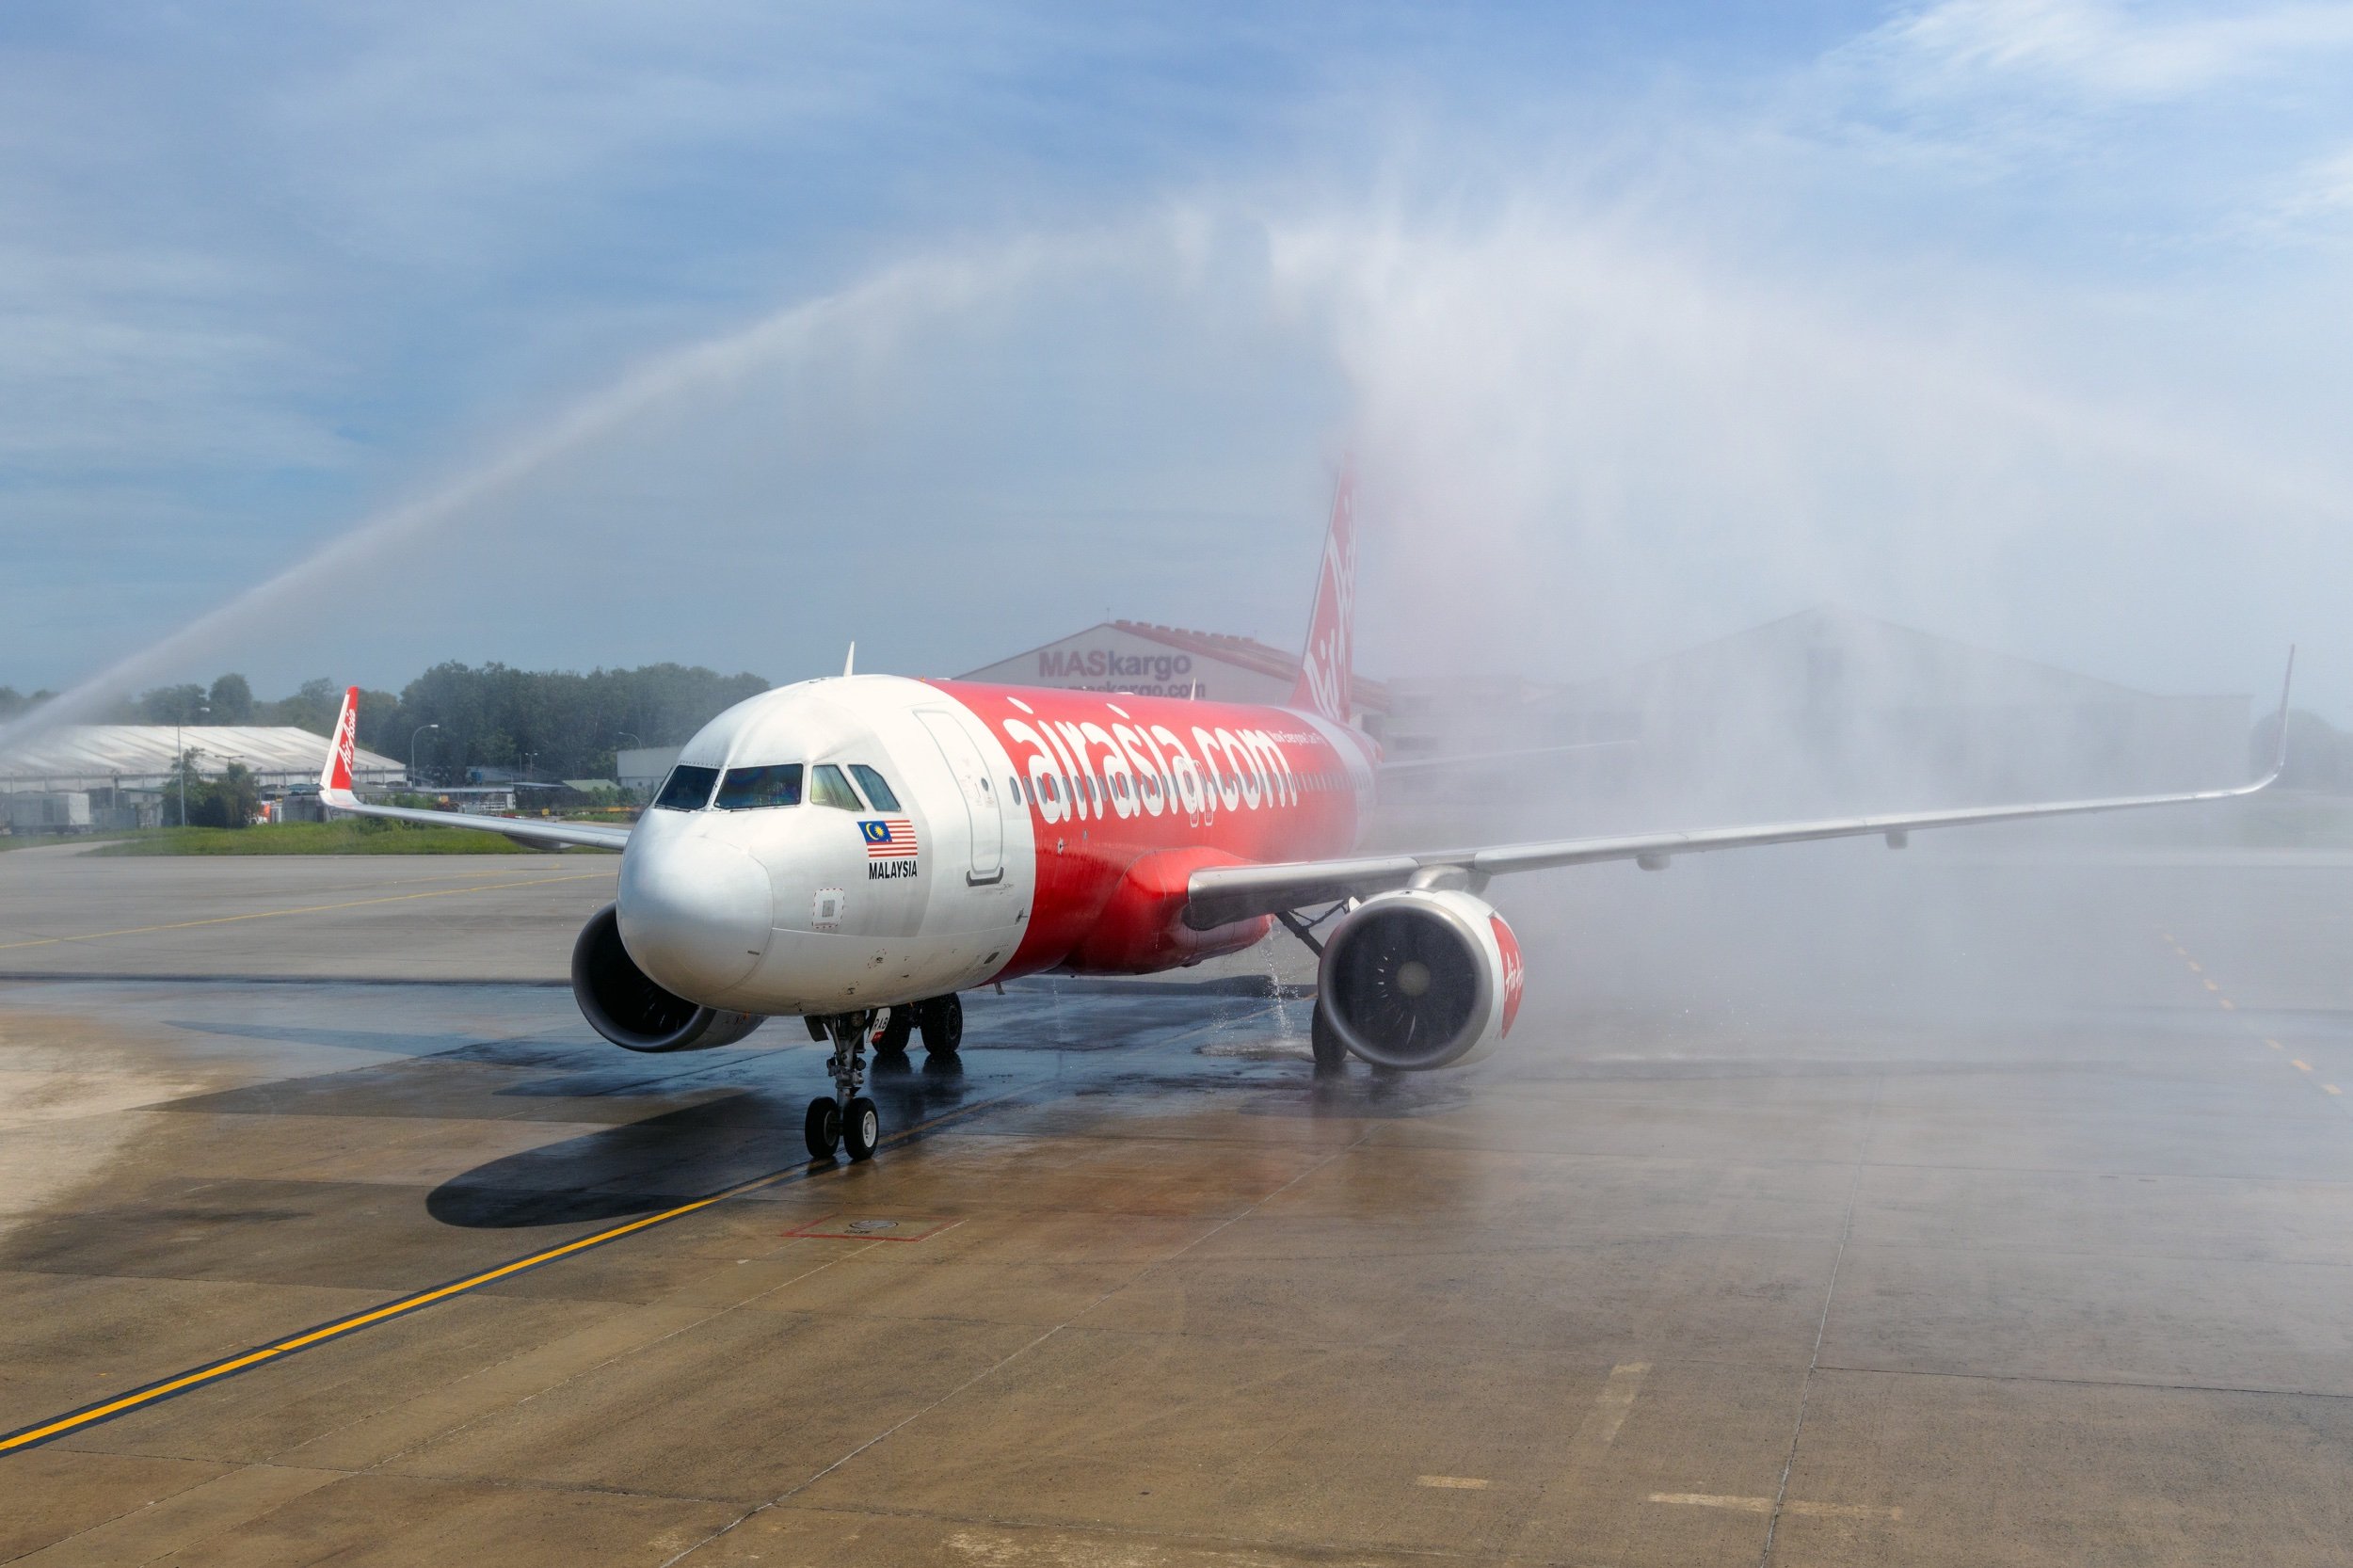  Photo Caption: AirAsia flight AK1302 from Macao greeted by water cannon salute upon landing at Kota KInabalu International Airport on Sunday afternoon. 